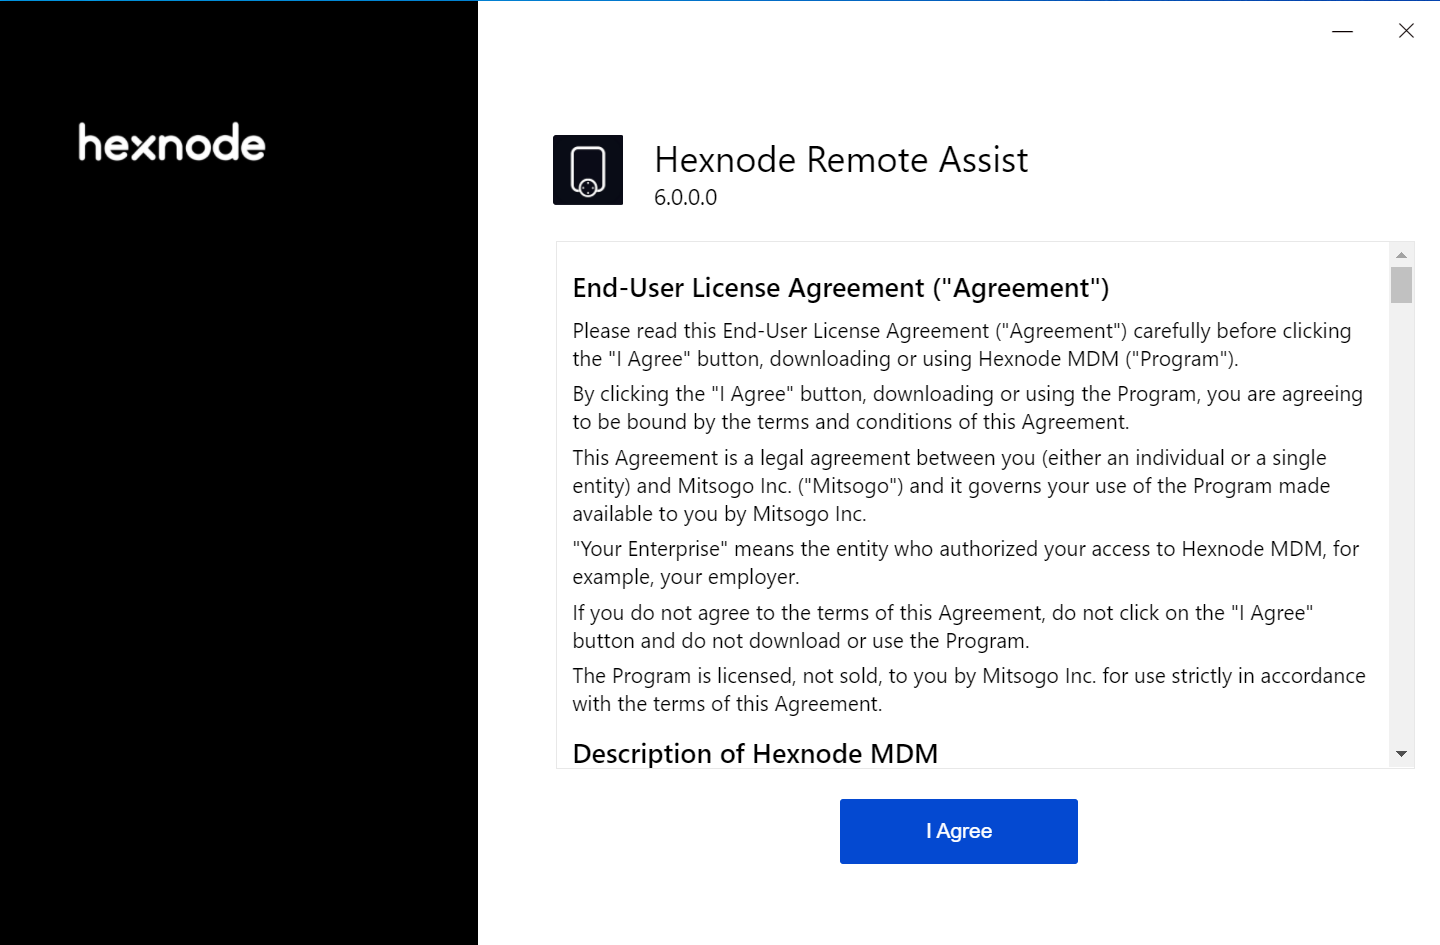 Agree the EULA terms and conditions for the Hexnode Remote Assist app